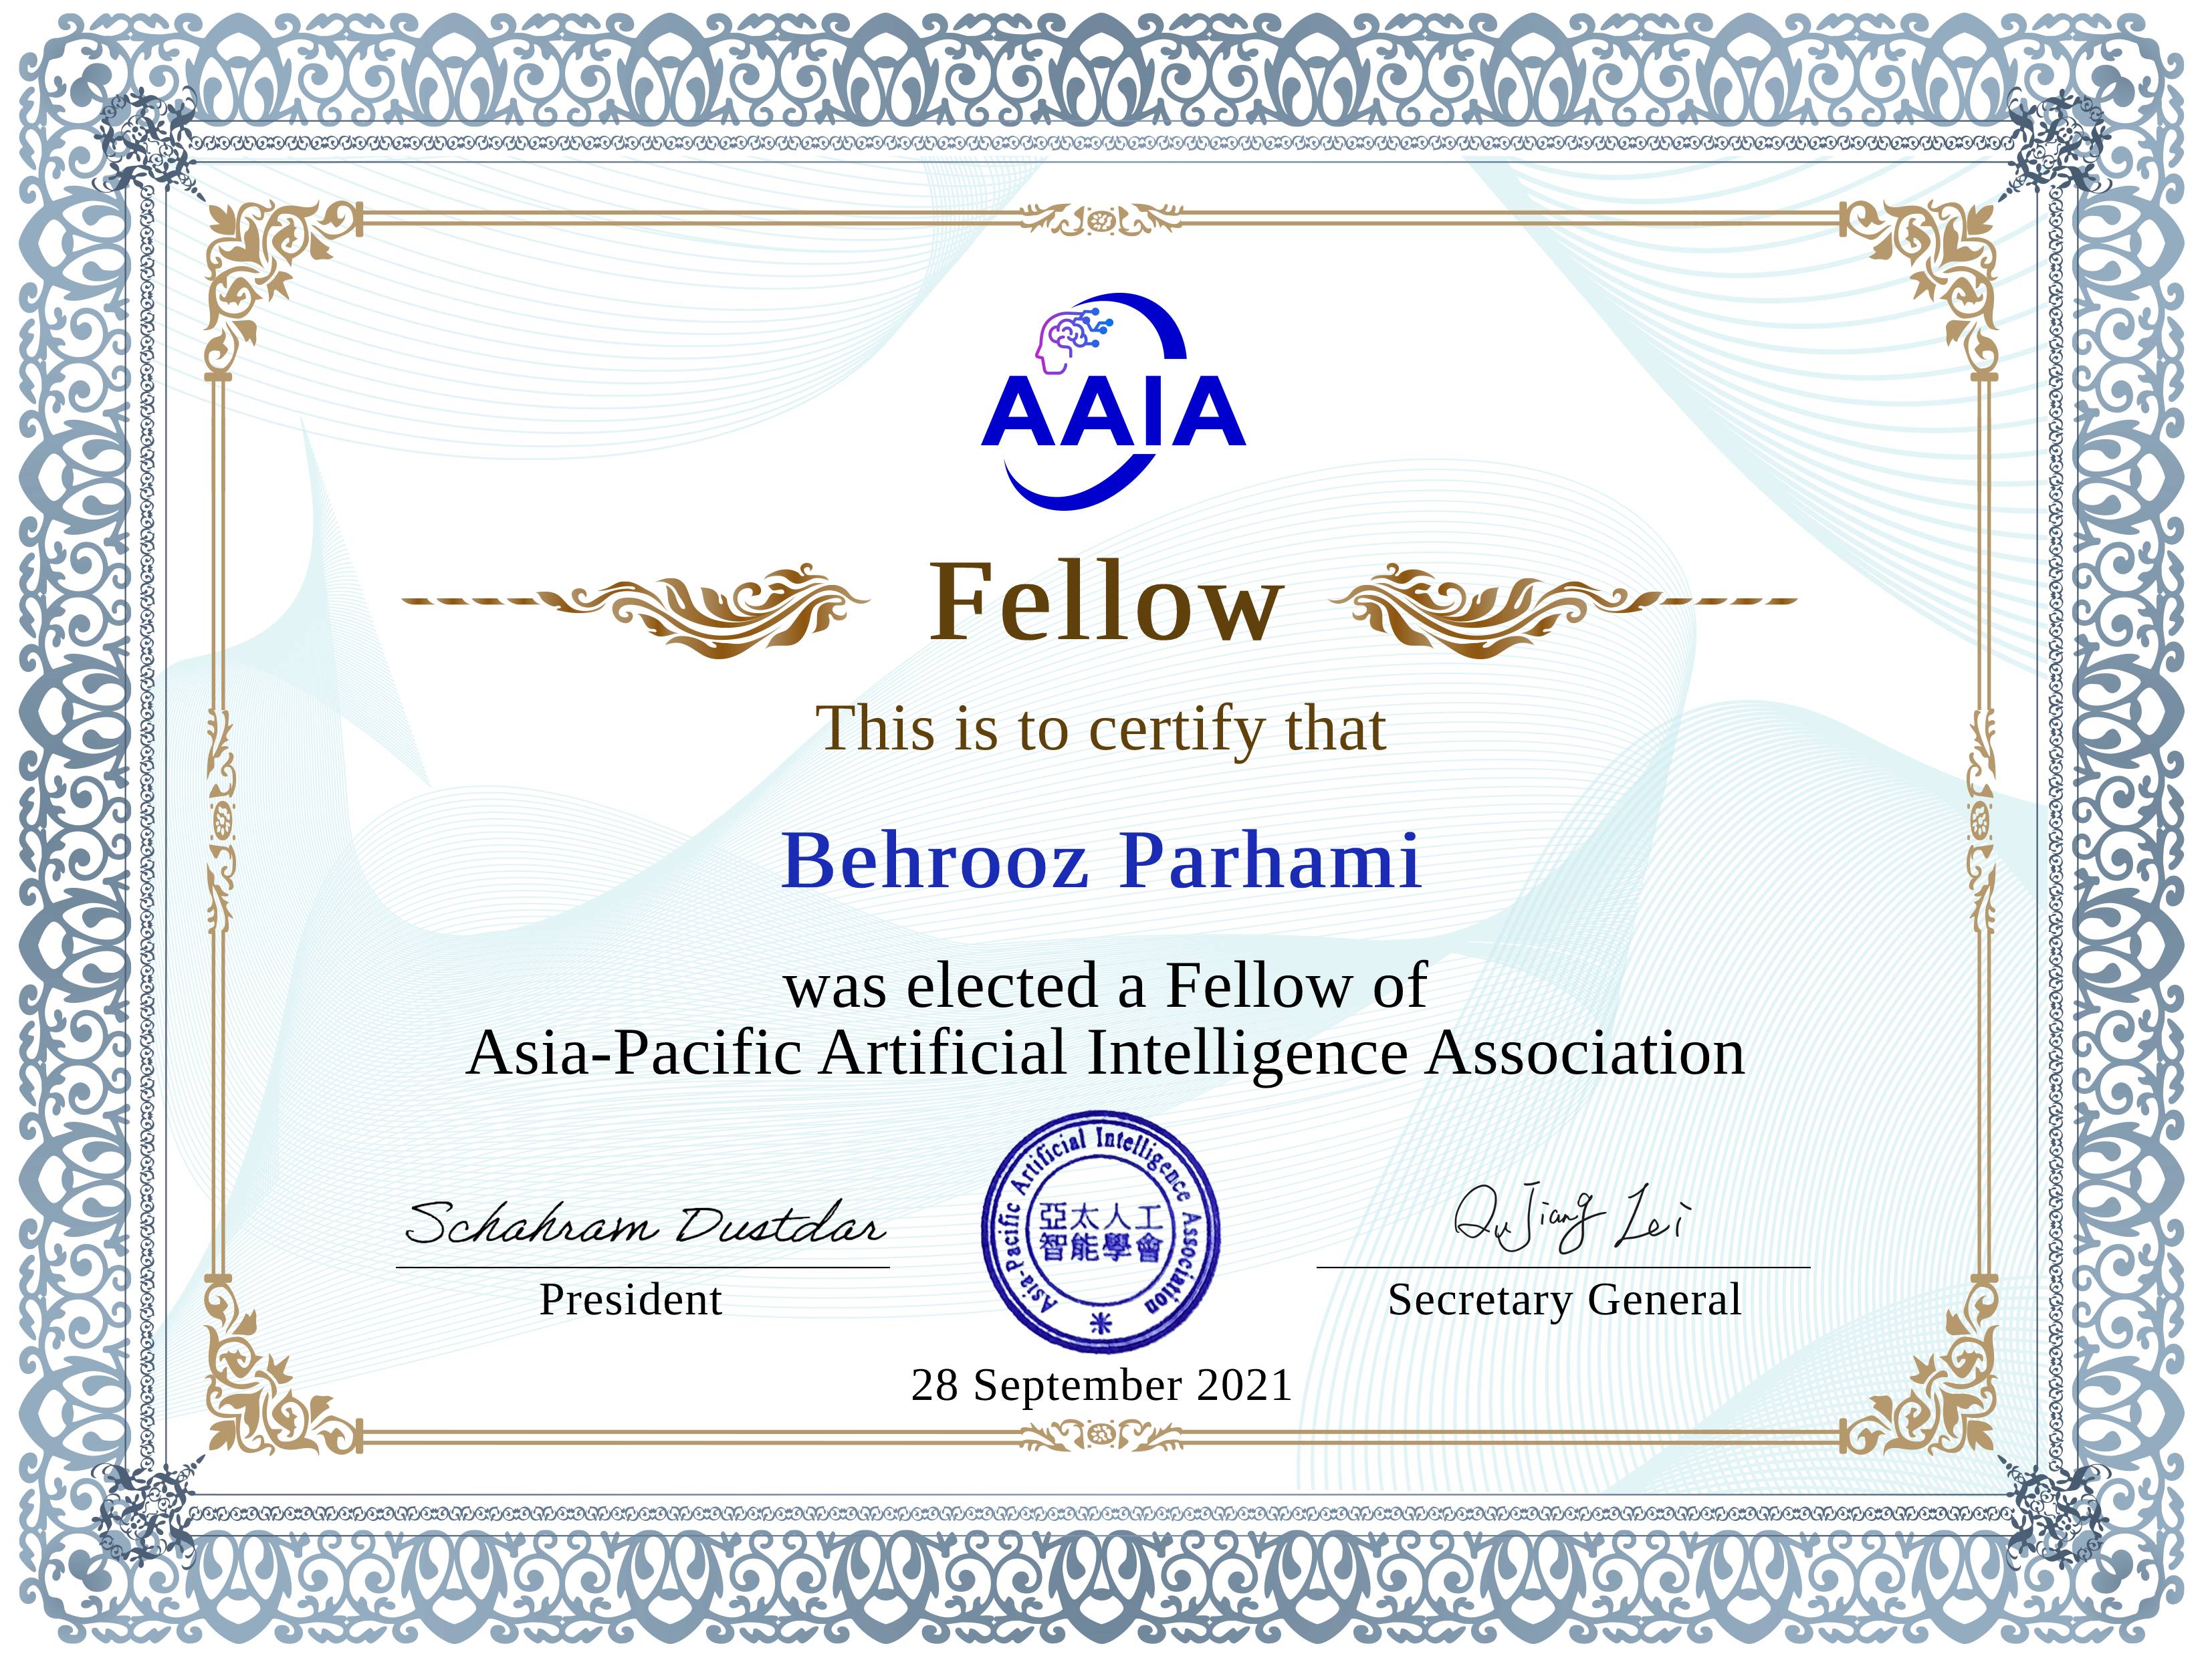 My certificate of Fellowship in Asia-Pacific Artificial Intelligence Association